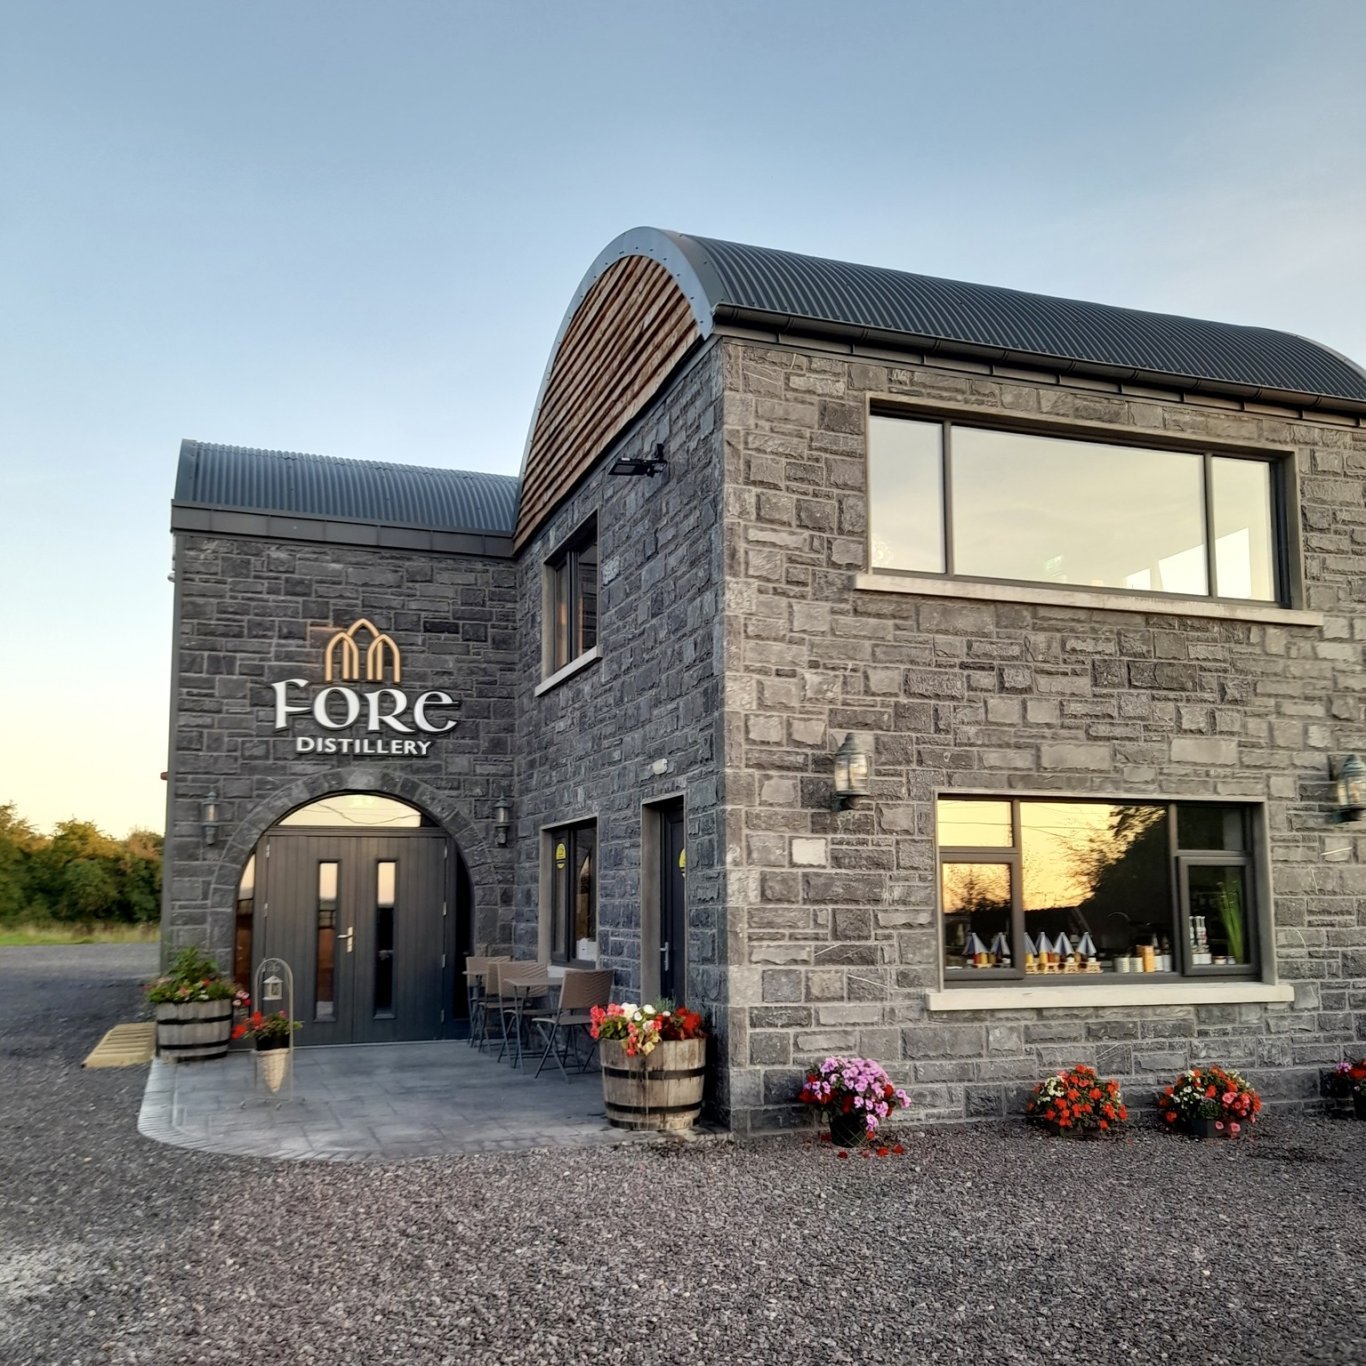 Fore distillery Outside Building